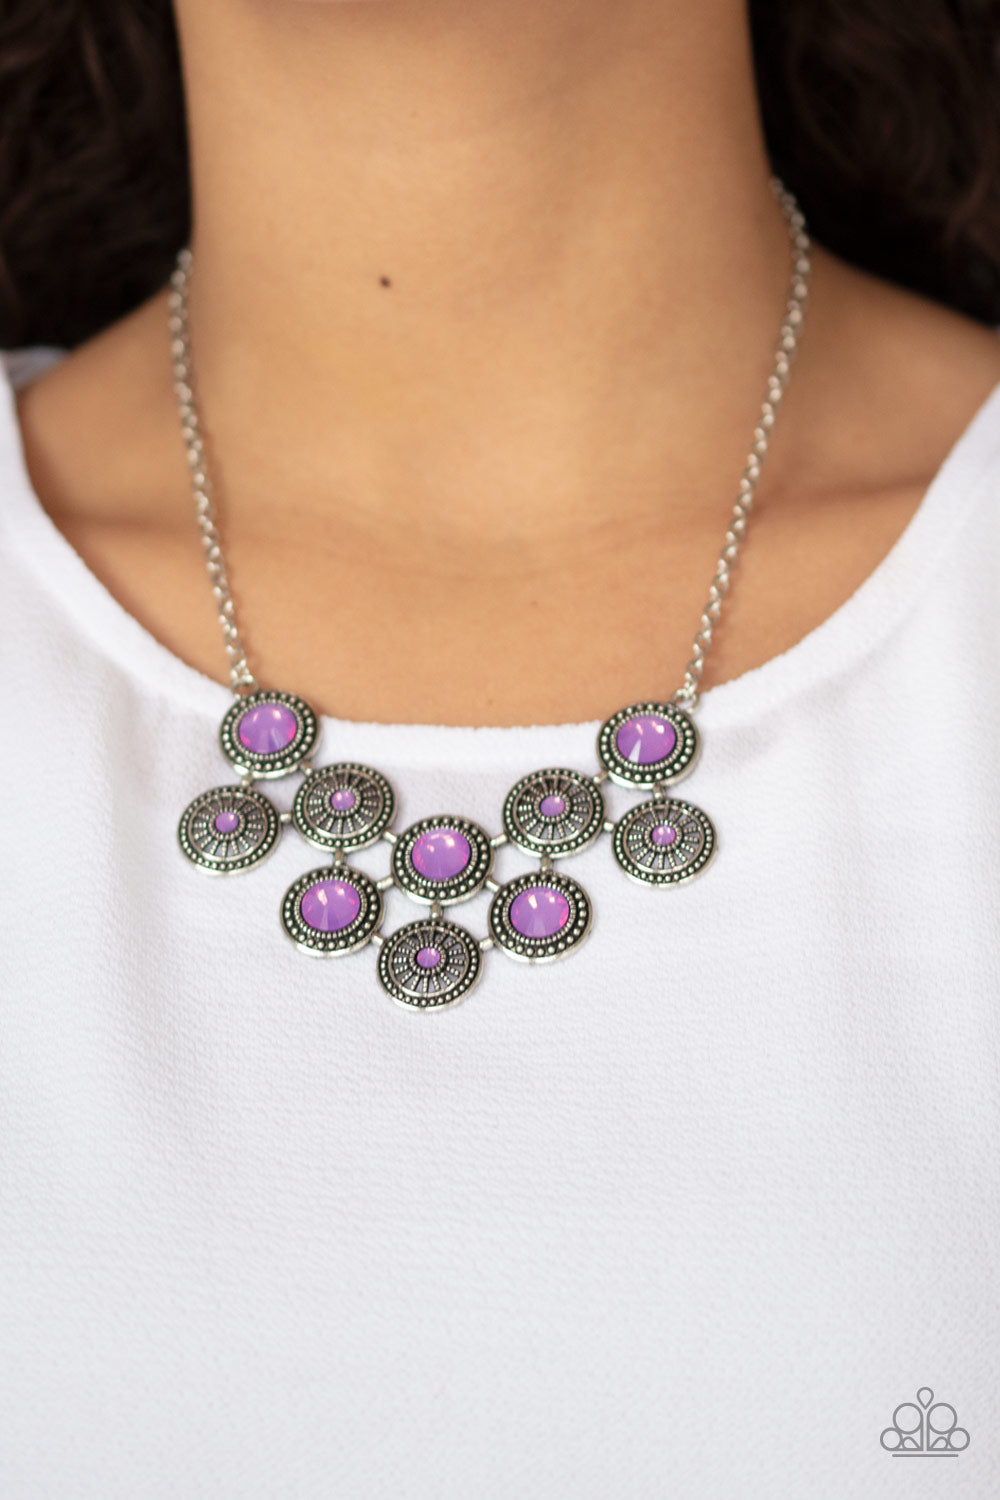 Whats Your Star Sign? - Purple Opalescent Gemstone Necklace- Paparazzi Accessories - All That Sparkles Xoxo 